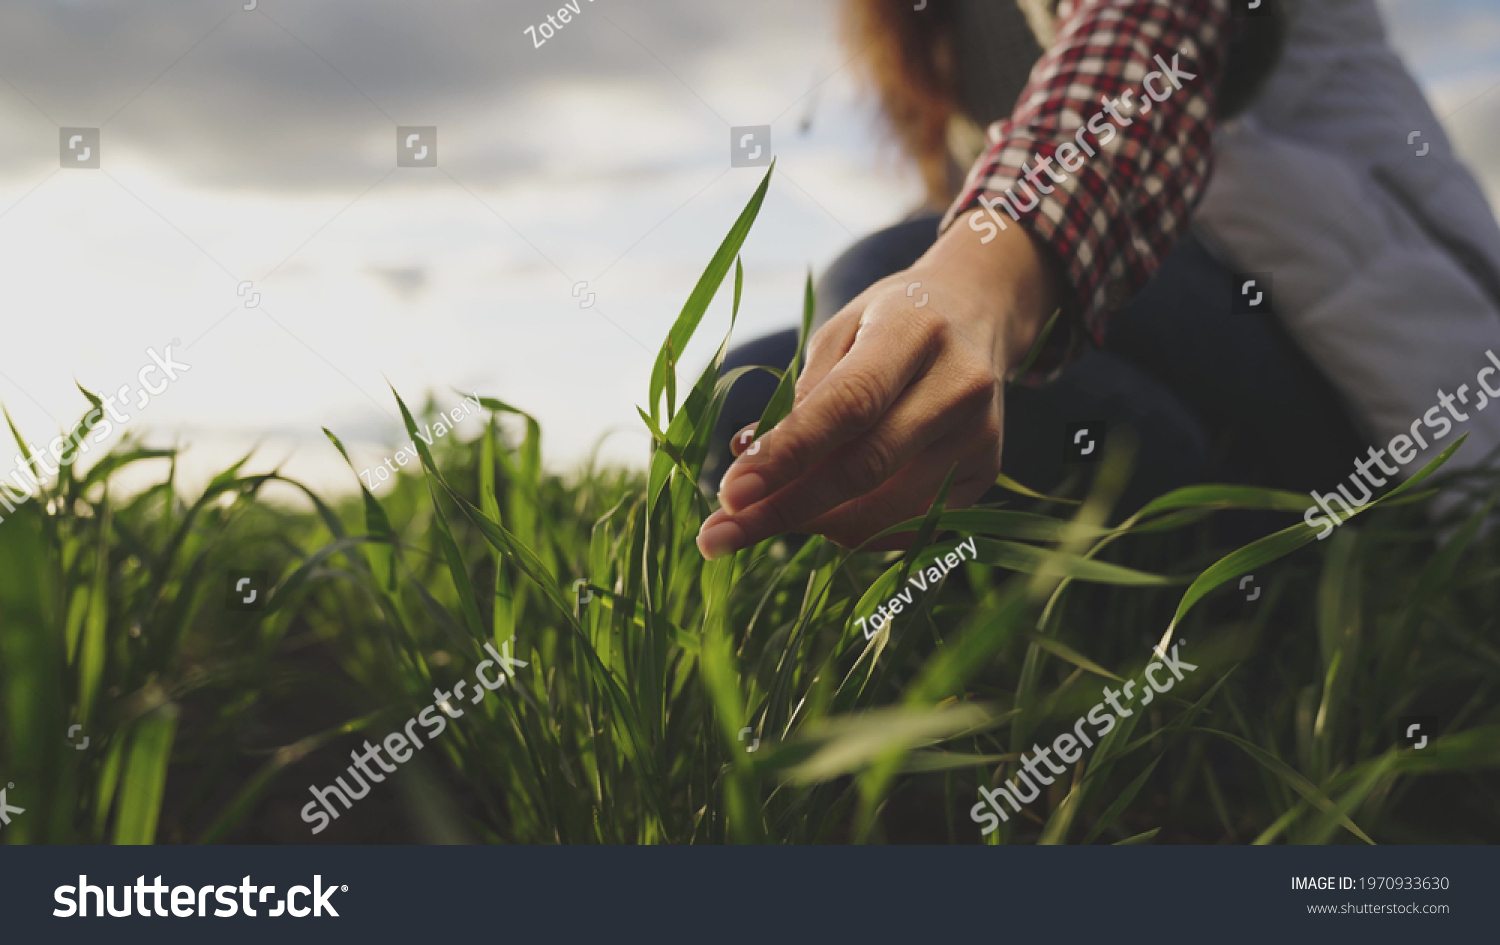 Farmer hand touches green leaves of young wheat in the field, the concept of natural farming, agriculture, the worker touches the crop and checks the sprouts, protect the ecology of the cultivated #1970933630